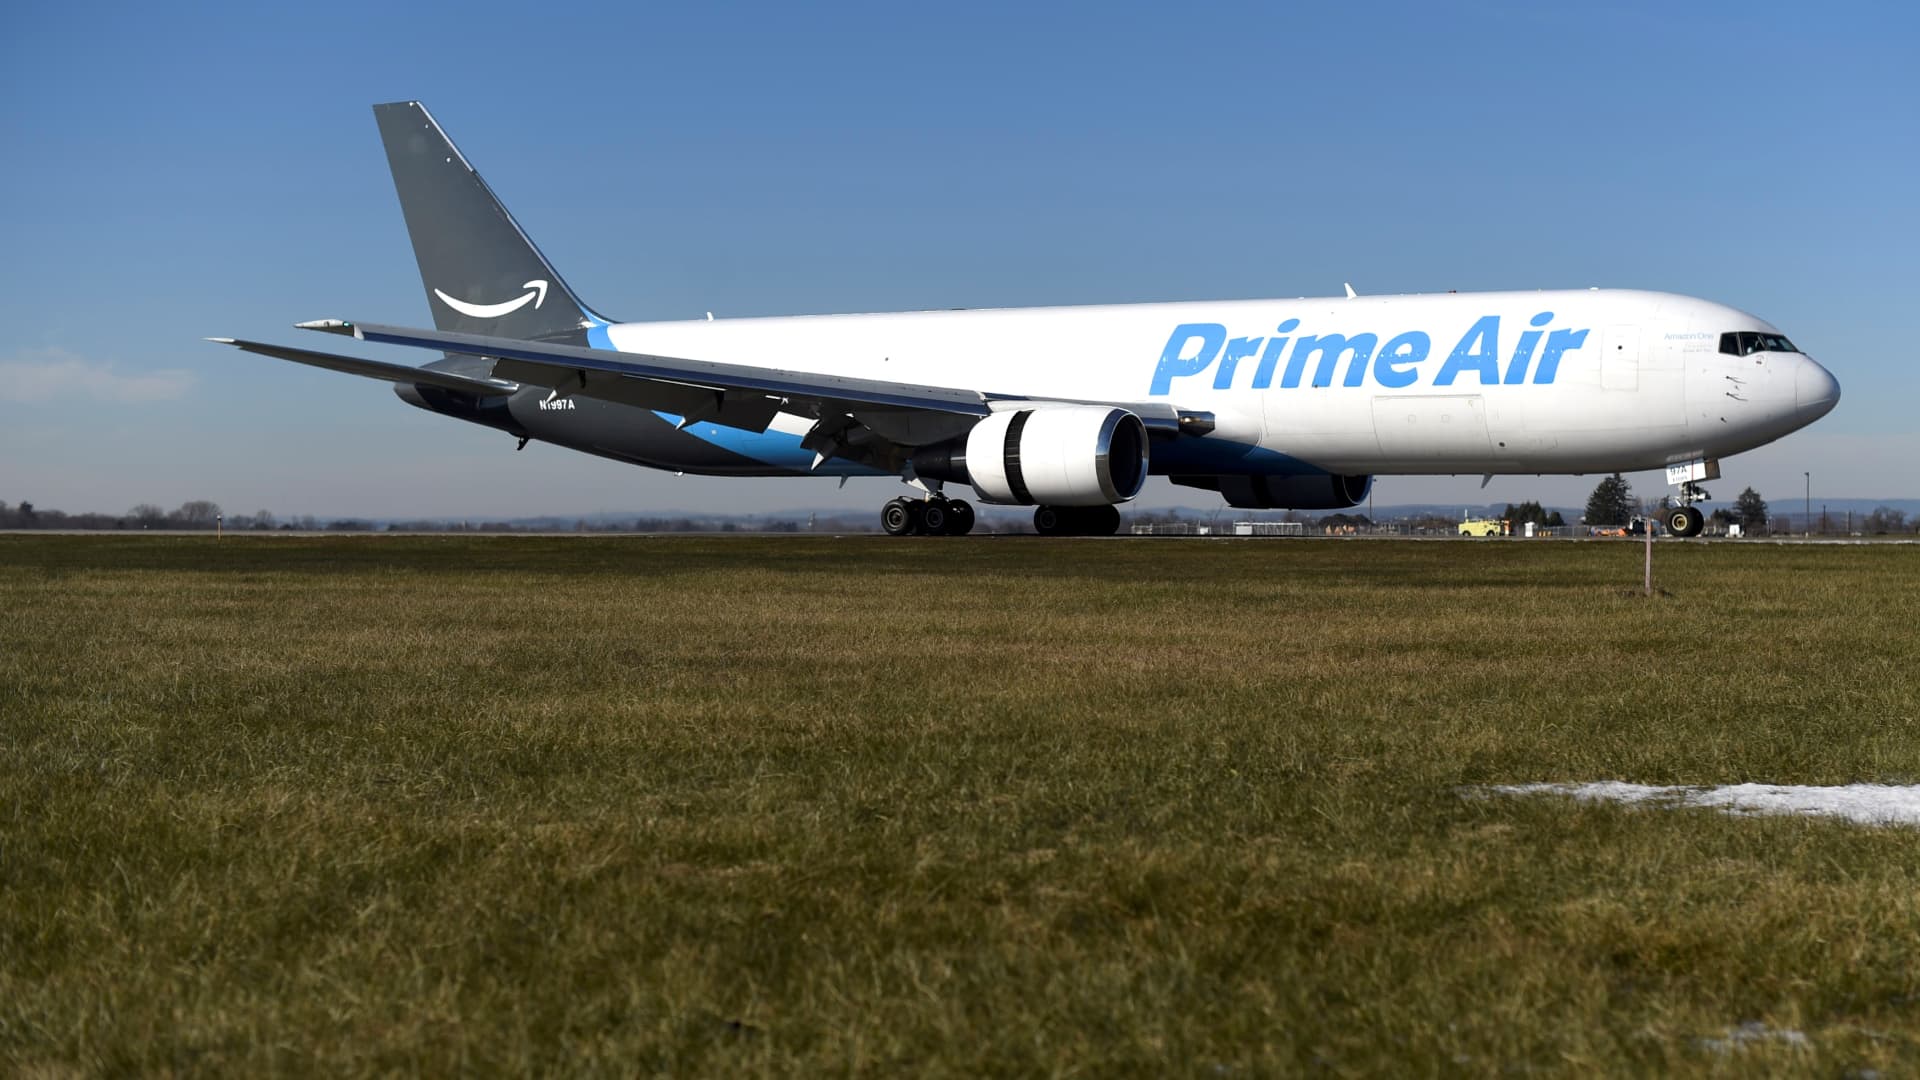 Amazon’s air cargo head changes jobs, will now oversee workplace-safety unit